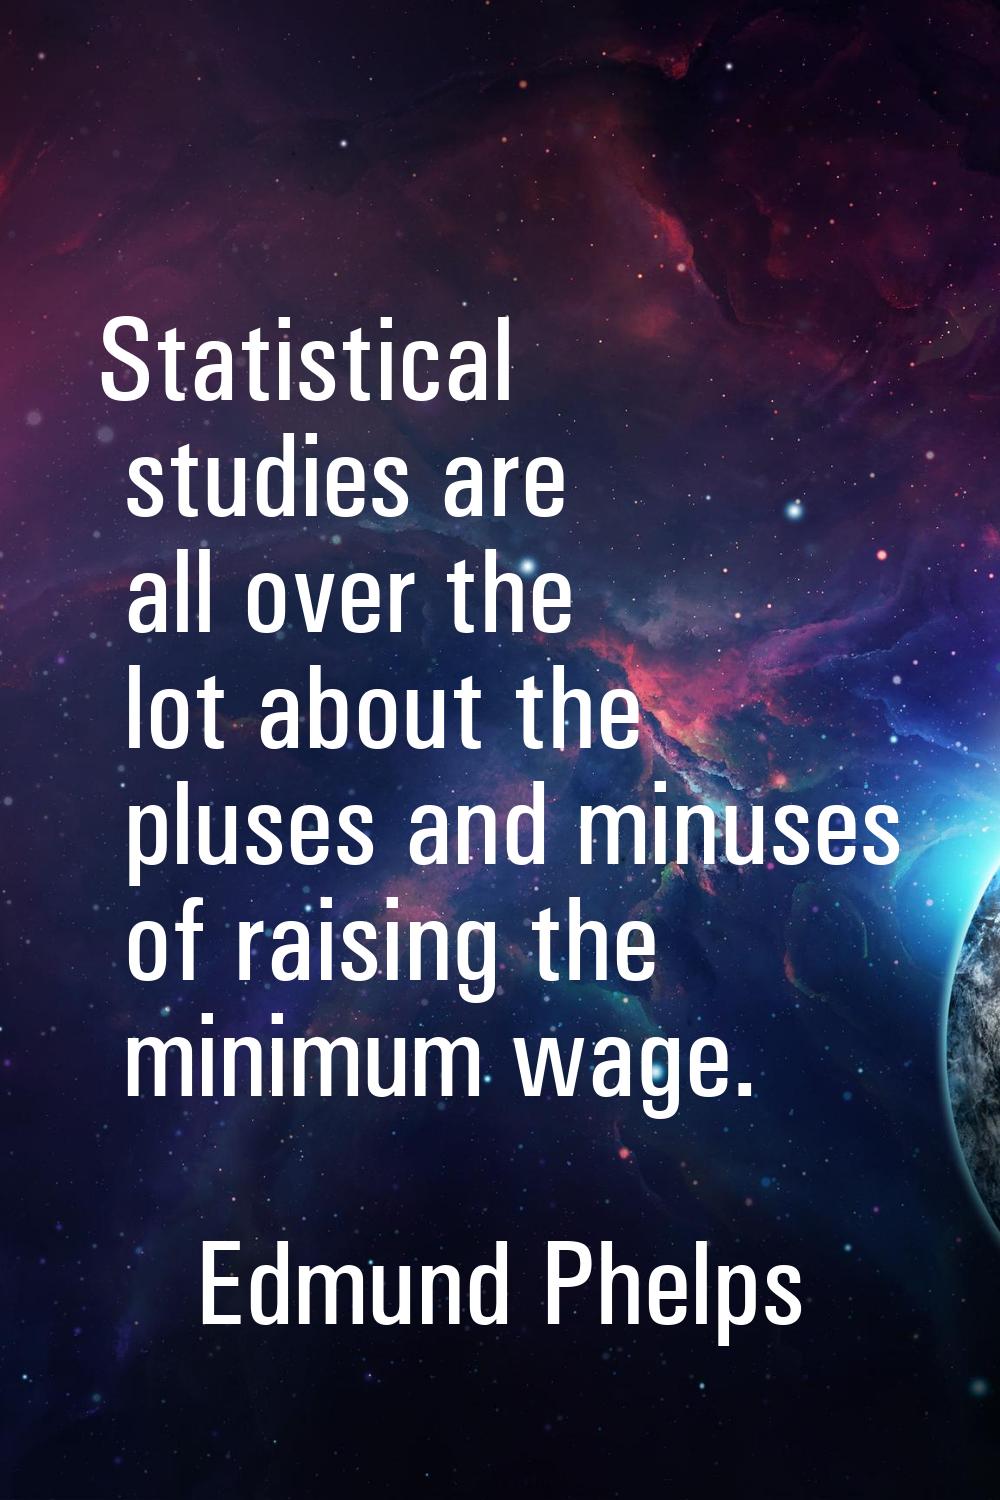 Statistical studies are all over the lot about the pluses and minuses of raising the minimum wage.